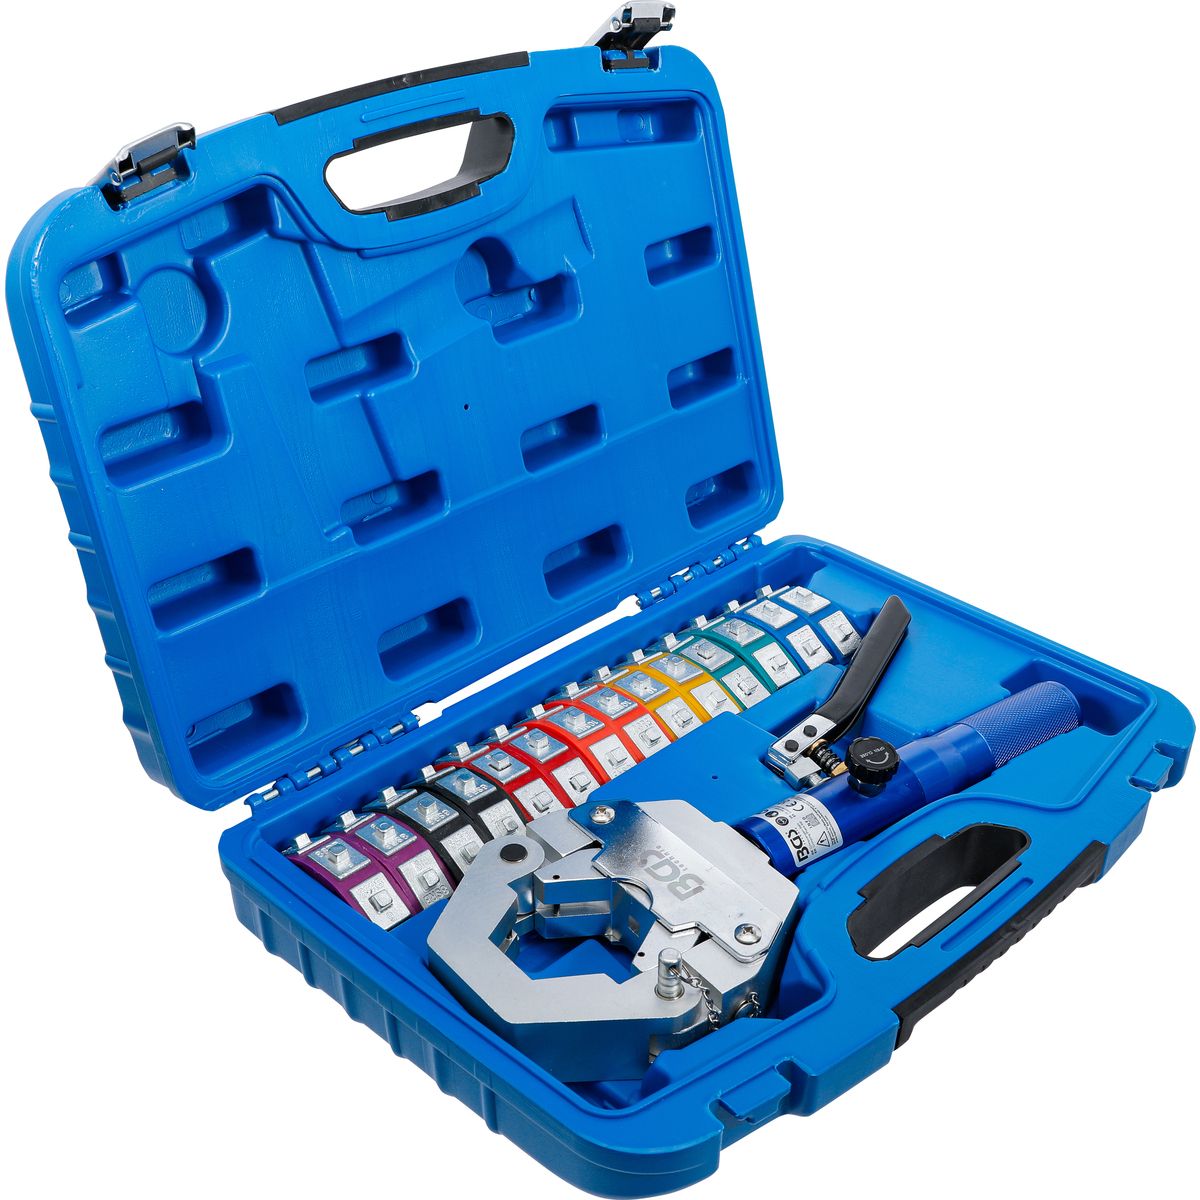 Crimping Pliers Set | hydraulic | for Press Connections on Hose Lines